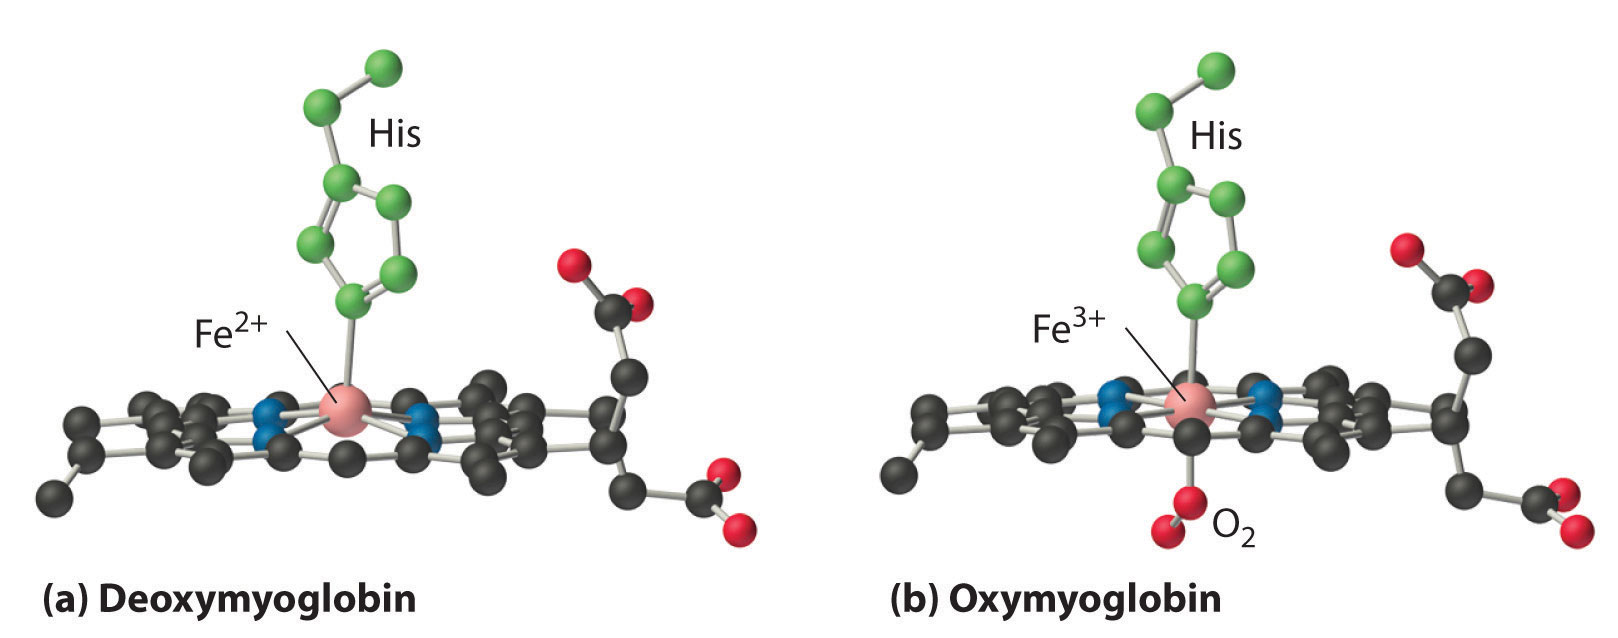 A side view of A. Deoxymyoglobin and B. oxymyogobin. The F e 2 positive in deoxymyoglobin is slightly raised above the plane of the porphyrin while the F e 3 positive ion in the oxymyoglobin is in the same plane as the porphyrin.